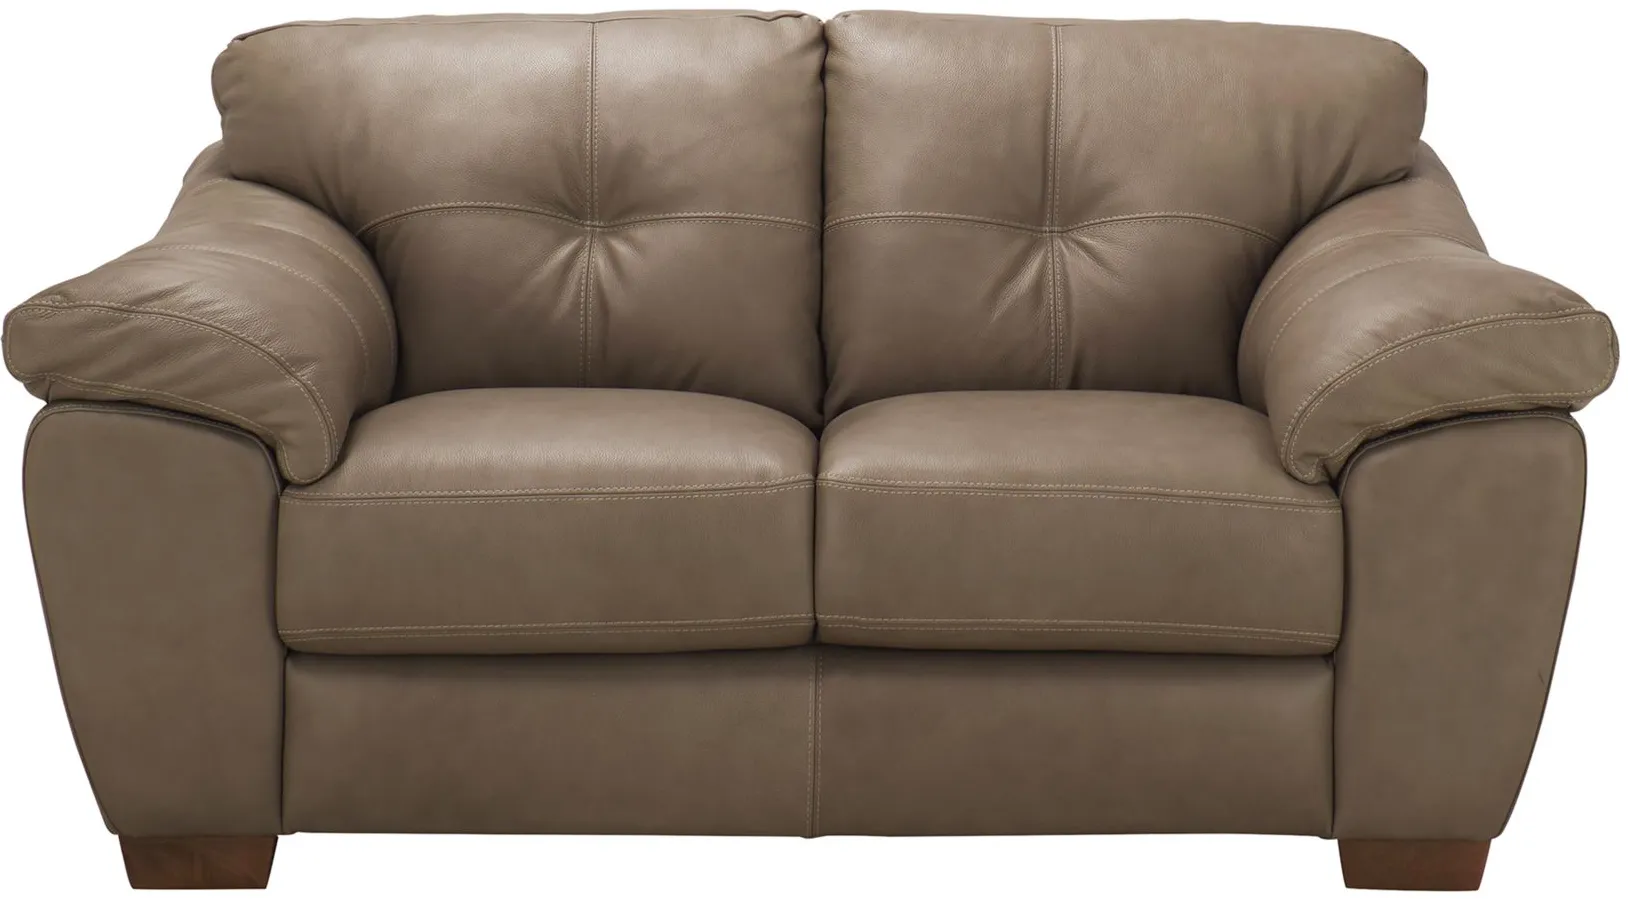 Bosco Loveseat in Taupe by Chateau D'Ax